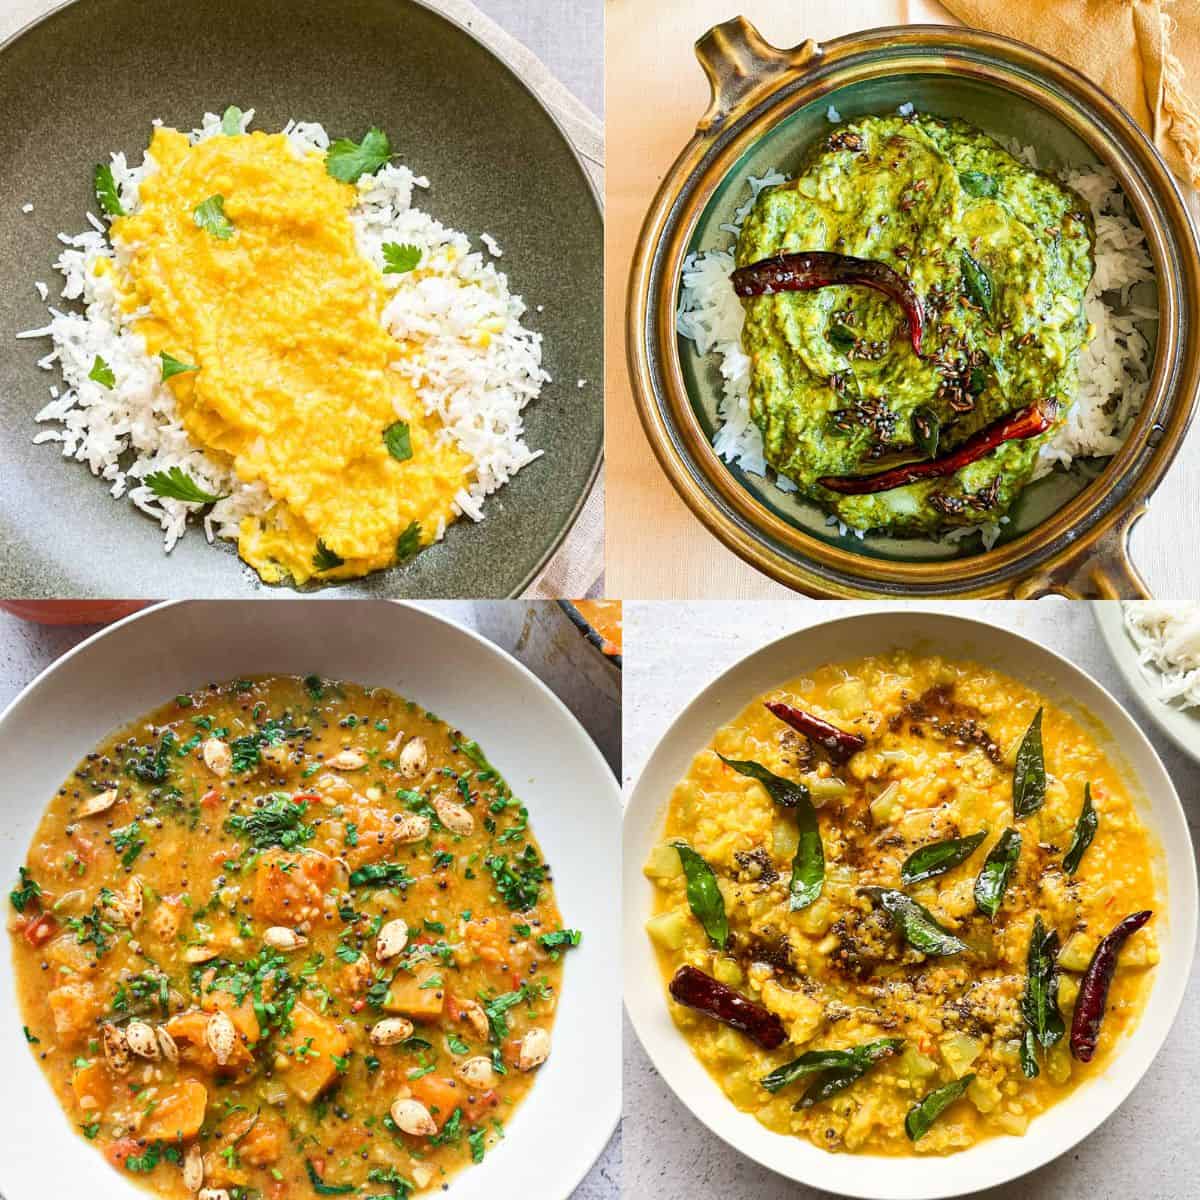 Photo of four Indian dal-based dishes. Top left is simple moong dal cooked on the stovetop, top right is spinach dal cooked in instant pot, bottom left is pumpkin sambar, and bottom right is chow chow kootu - a dal and lentil stew.